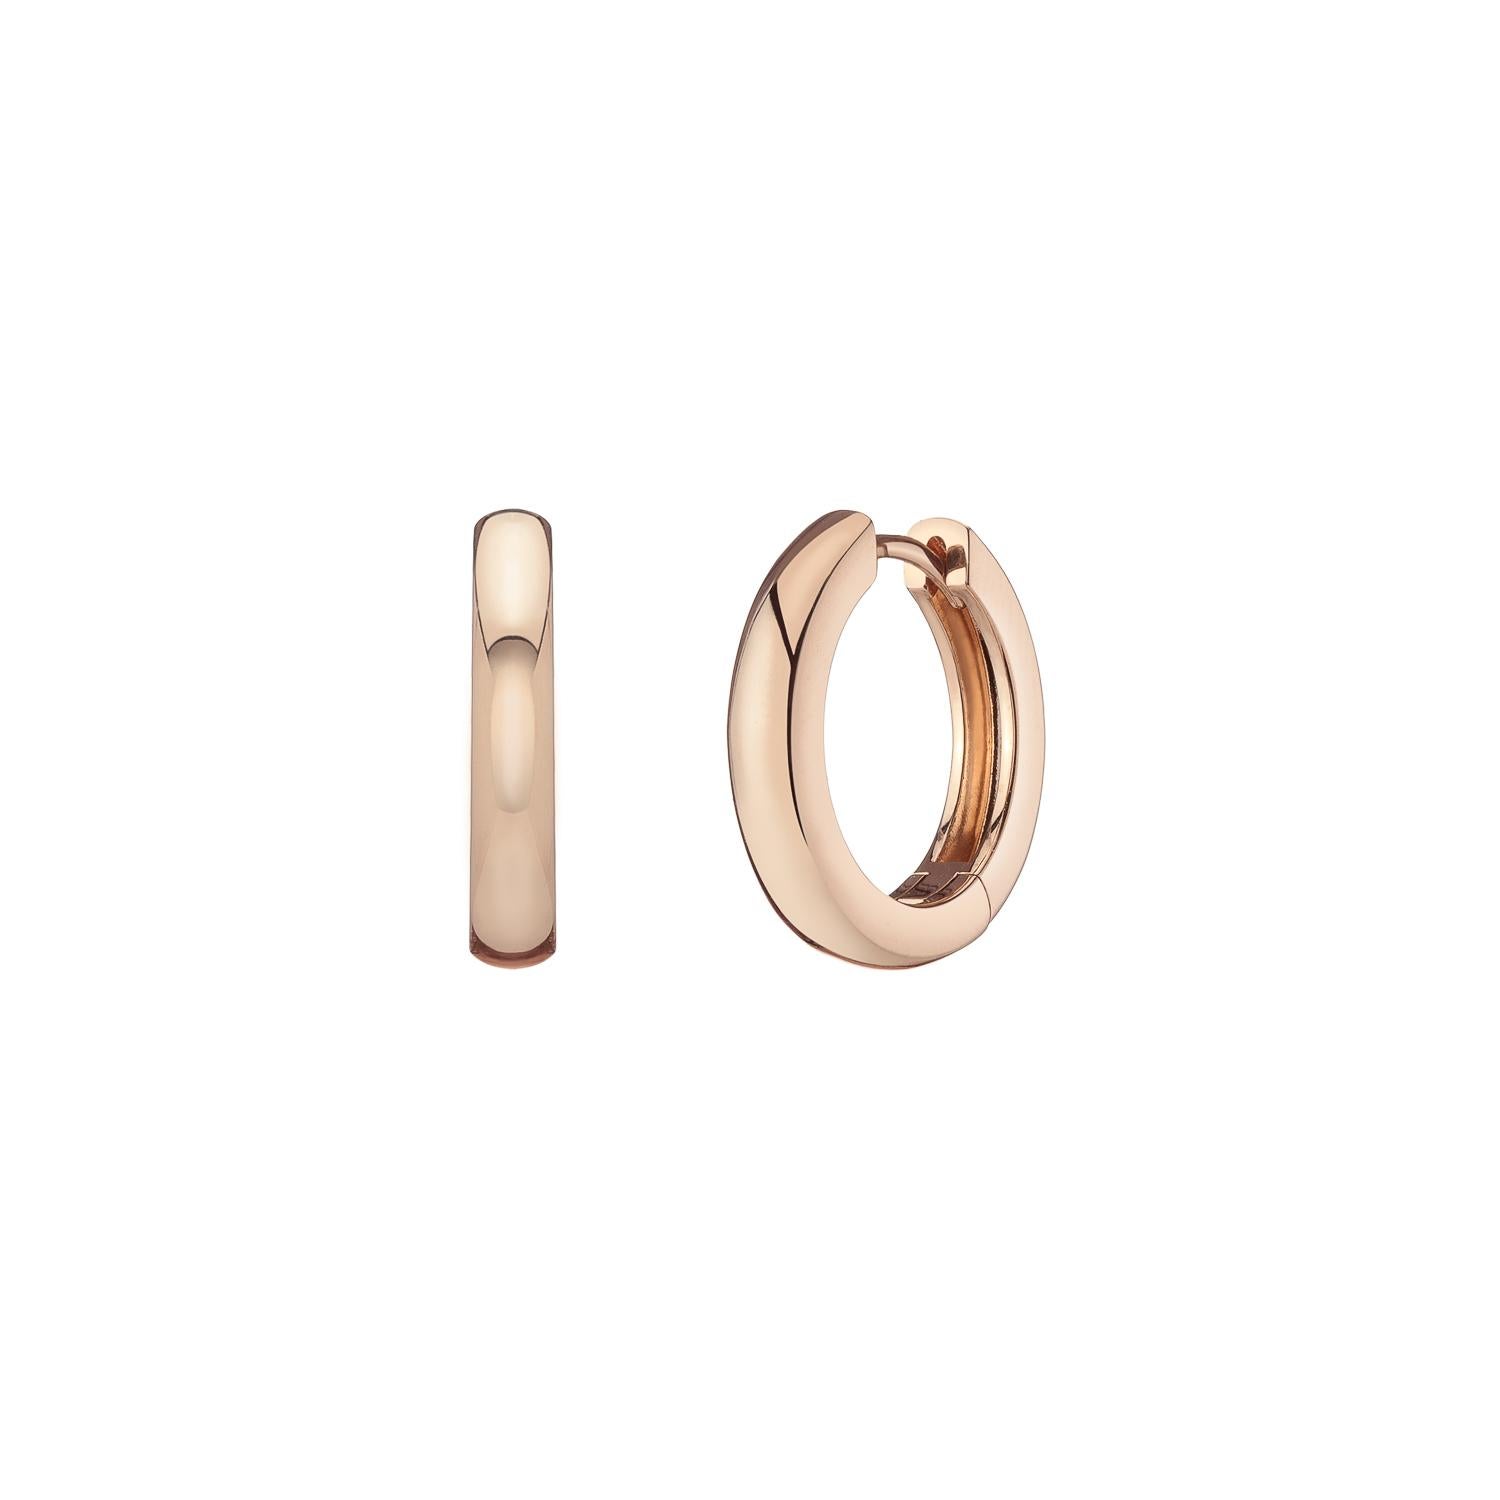 Contemporary Hinged 14 Karat Yellow Gold Hoops by Selin Kent